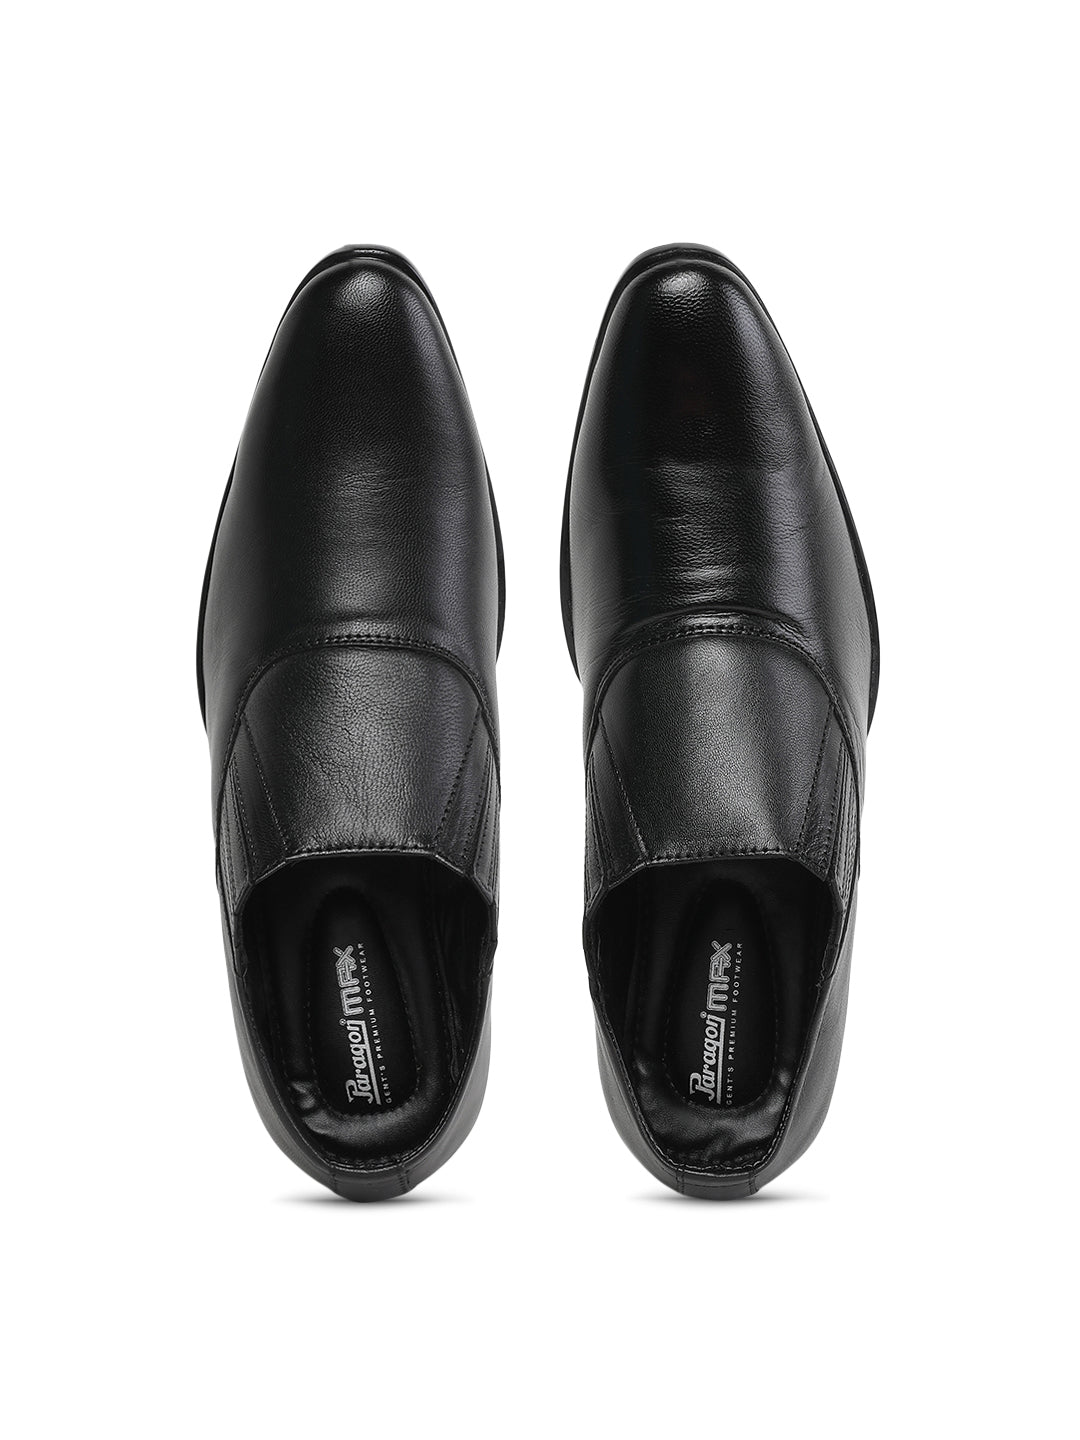 Paragon  R11215G Men Formal Shoes | Corporate Office Shoes | Smart &amp; Sleek Design | Comfortable Sole with Cushioning | For Daily &amp; Occasion Wear